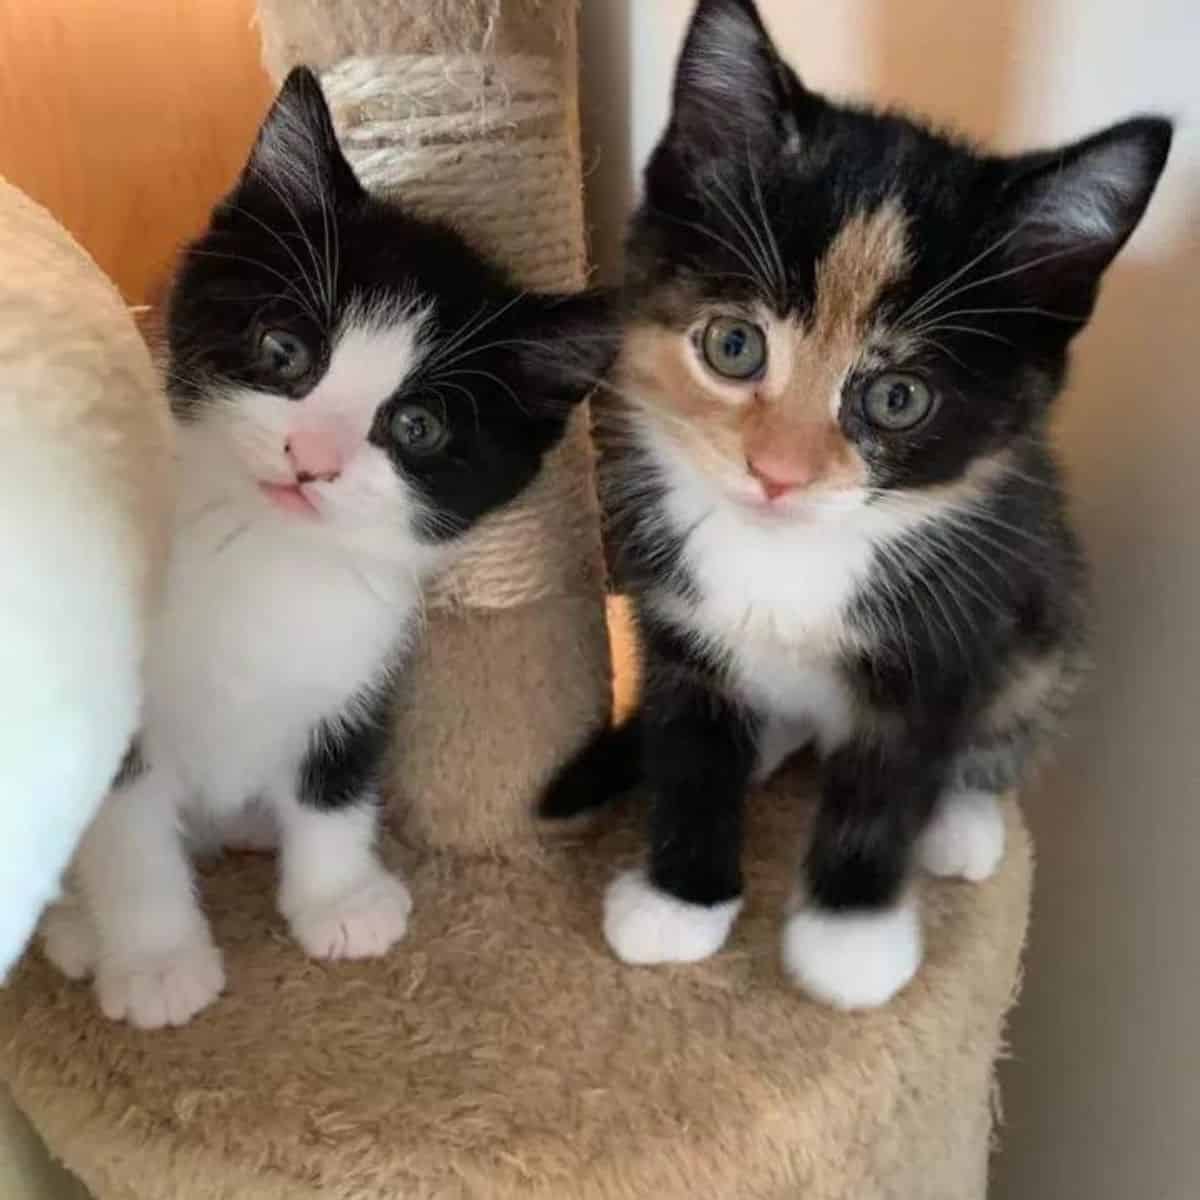 two stray kittens looking at the camera